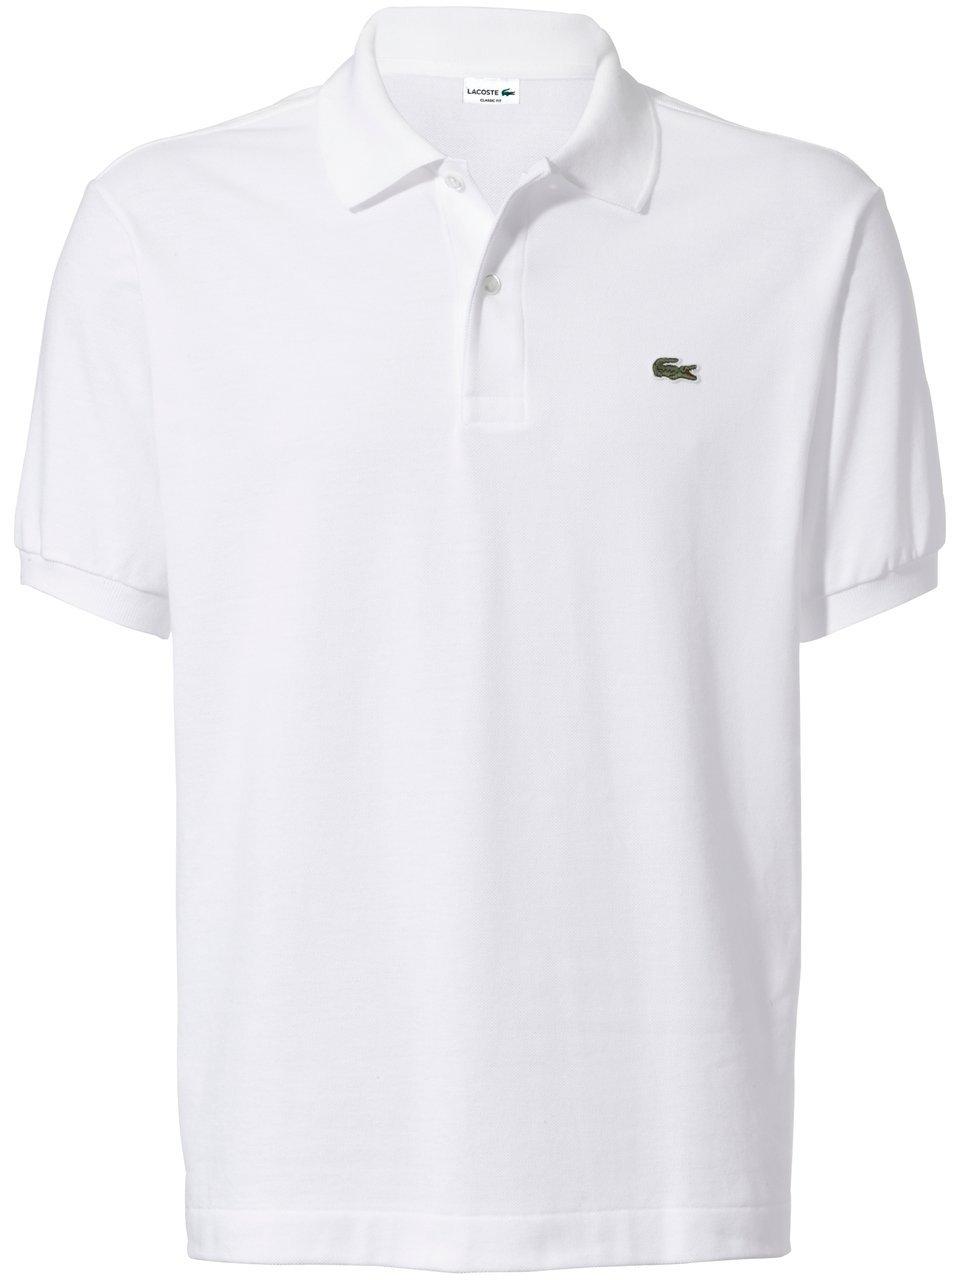 Polo-Shirt Lacoste weiss